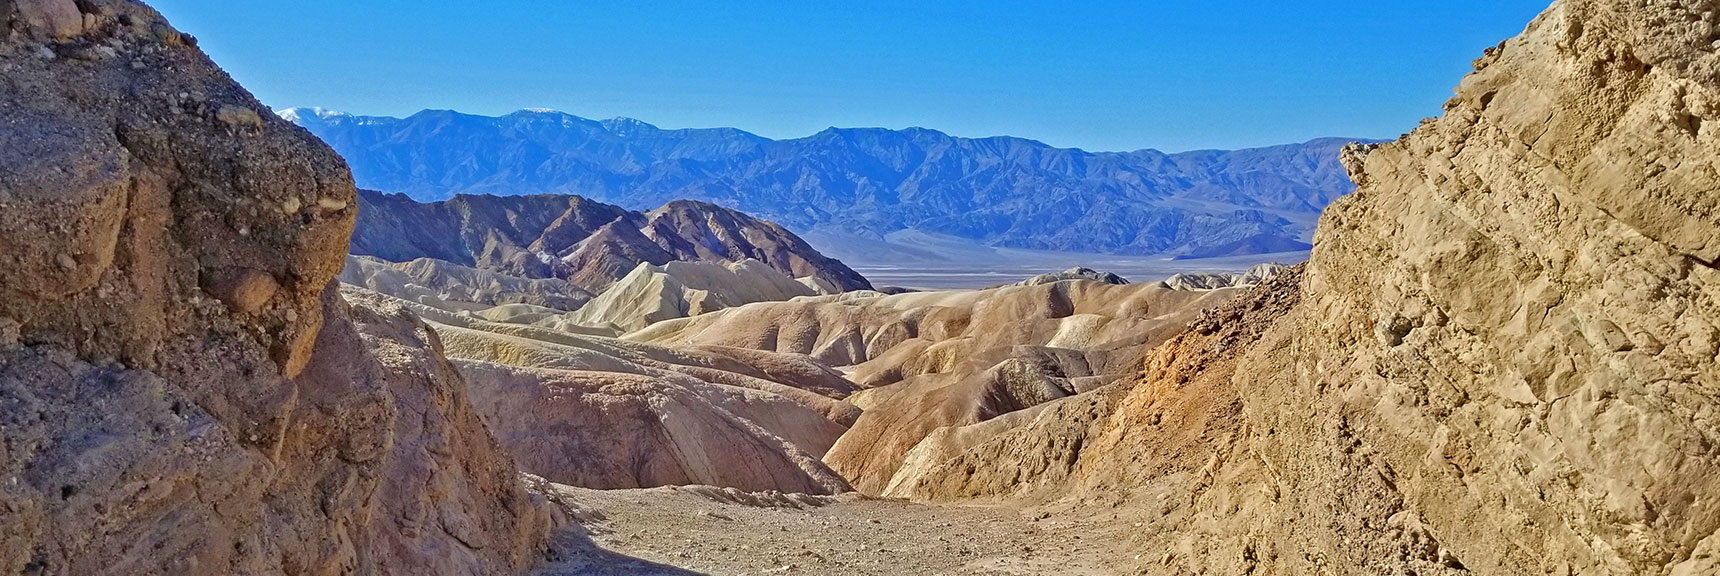 Descending Into the Badlands from Official Zabriskie Point Trailhead. | Golden Canyon to Zabriskie Point | Death Valley National Park, California